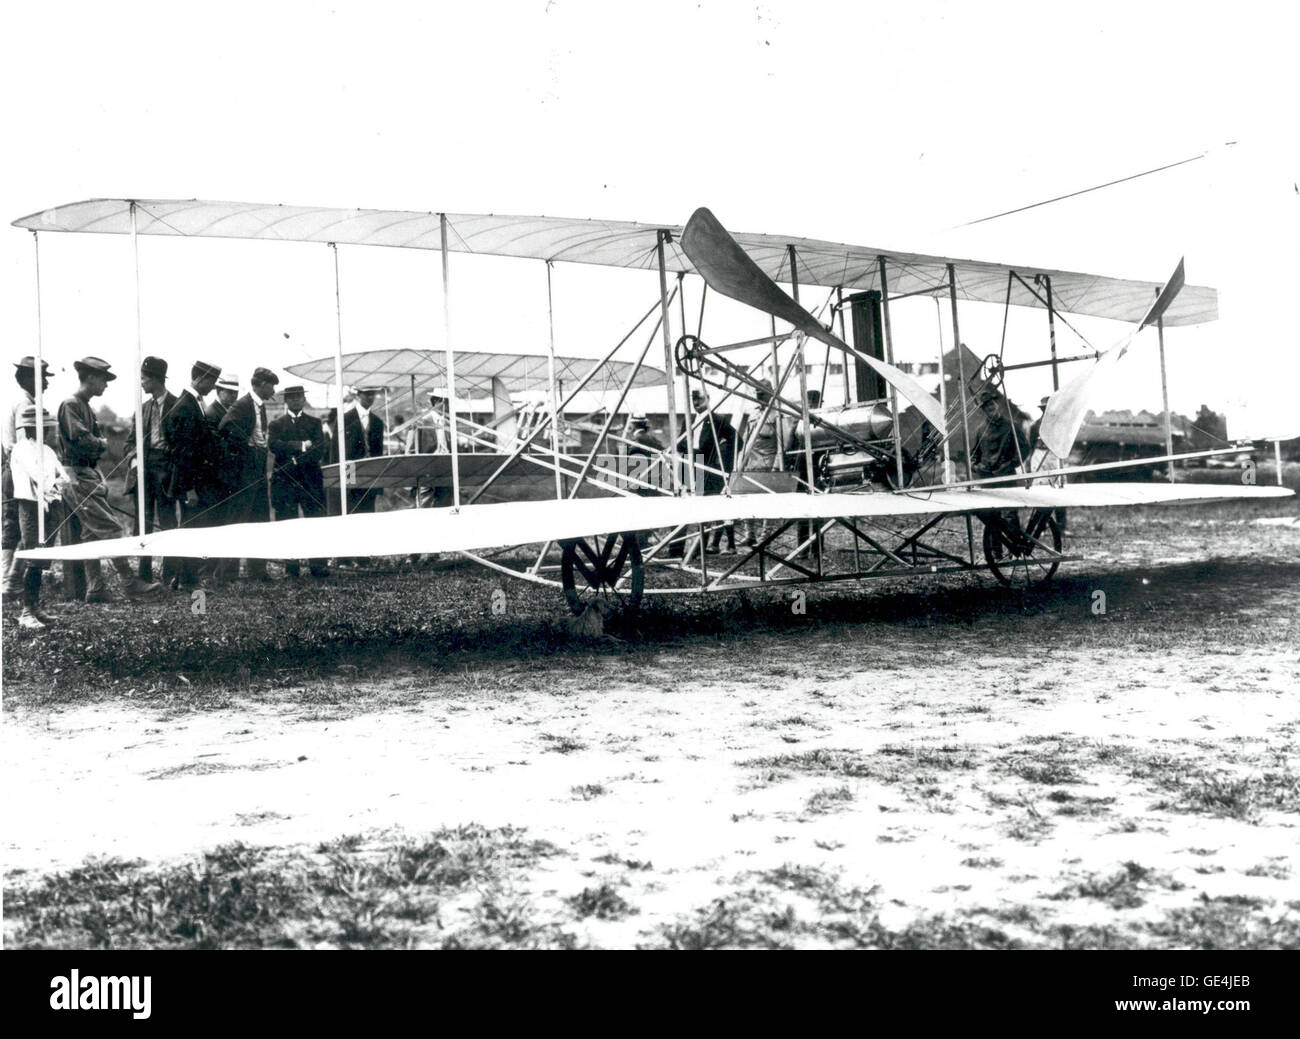 (September 3, 1908) The Wright Flyer demonstrations at Fort Myer, Virginia on September 3, 1908. In January 1908 the Wright Brothers submitted a bid to the U.S. War Department to design a plane for $25,000. This bid came as a response to a War Department request issued a month earlier for a &quot;Heavier-than-air Flying Machine.&quot; While Wilbur Wright went off to Paris to promote the Wright Flyer, Orville Wright stayed in Dayton, Ohio to design a plane for the Army Signal Corps. By August Orville's plane was ready and he headed to Fort Myer, Virginia, where the air trials were to take place Stock Photo